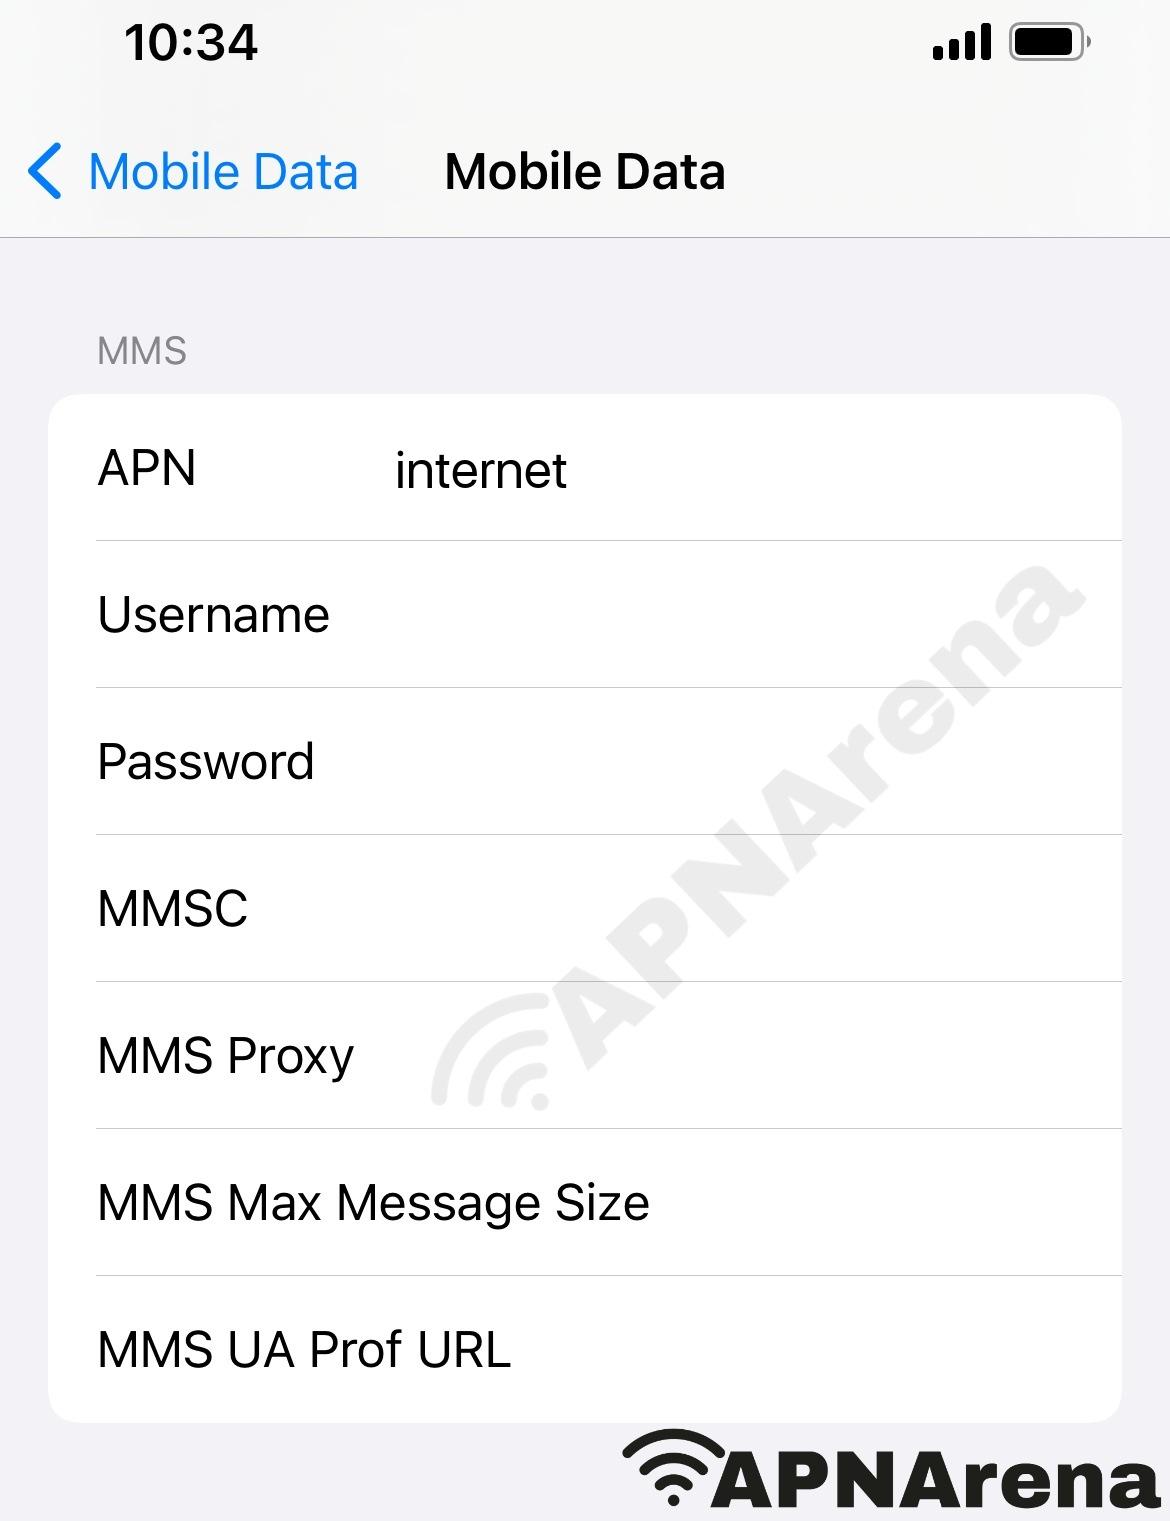 Public Mobile MMS Settings for iPhone